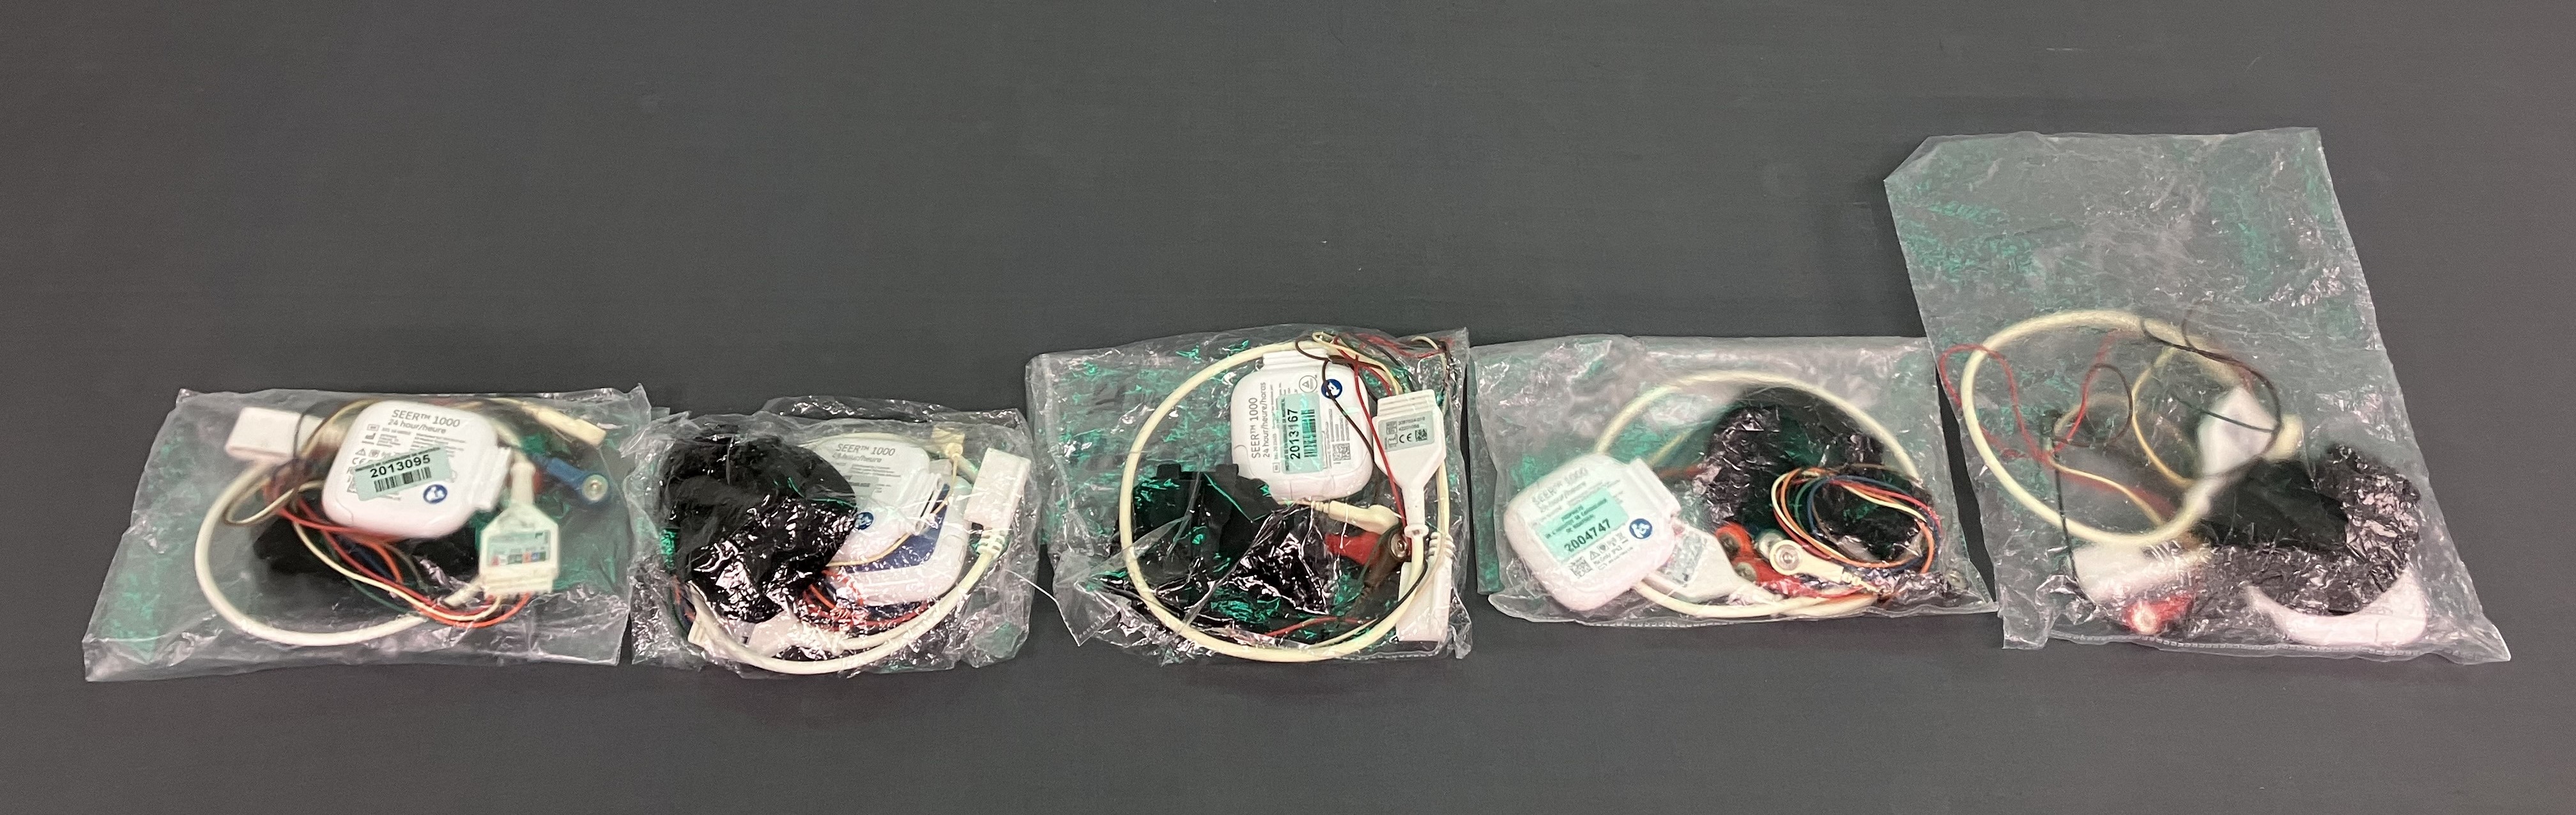 GE SEER 1000 24- and 48-Hour Holter Recorders / Monitors – lot of 6